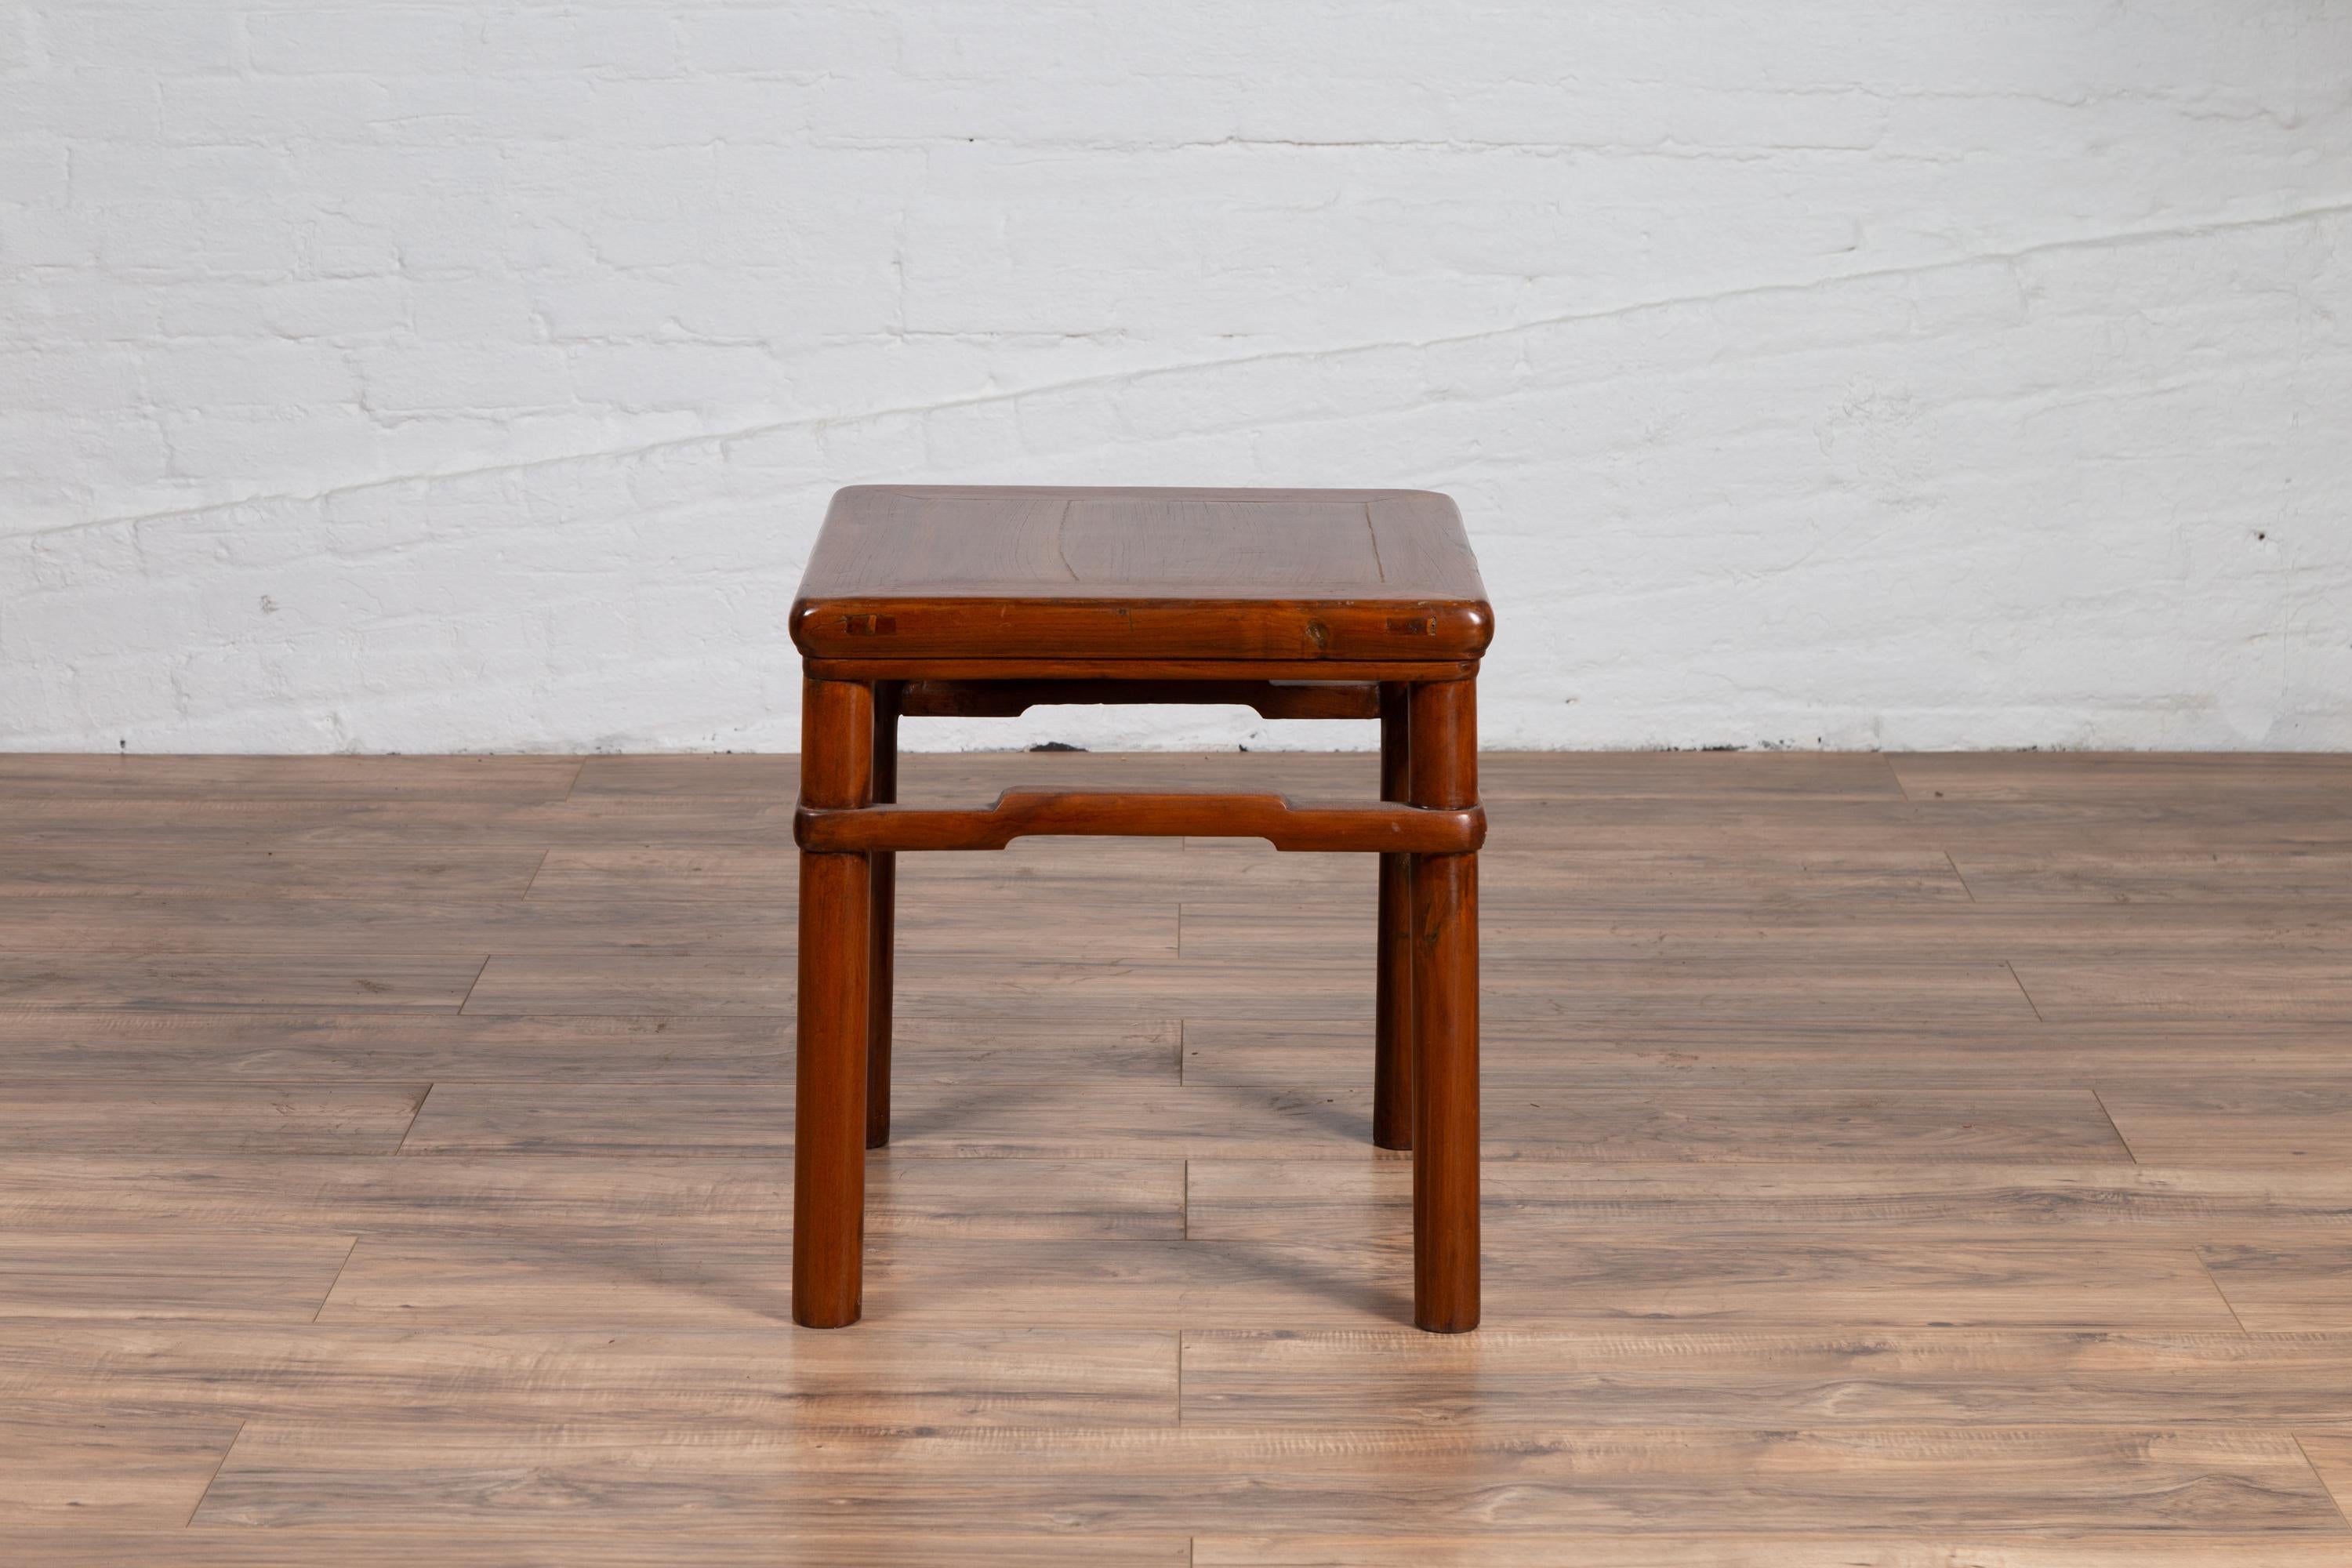 An antique Chinese Ming dynasty style wooden side table from the early 20th century, with humpbacked stretcher and cylindrical legs. Originally conceived as a stool in China where it was born during the early years of the 20th century, this charming